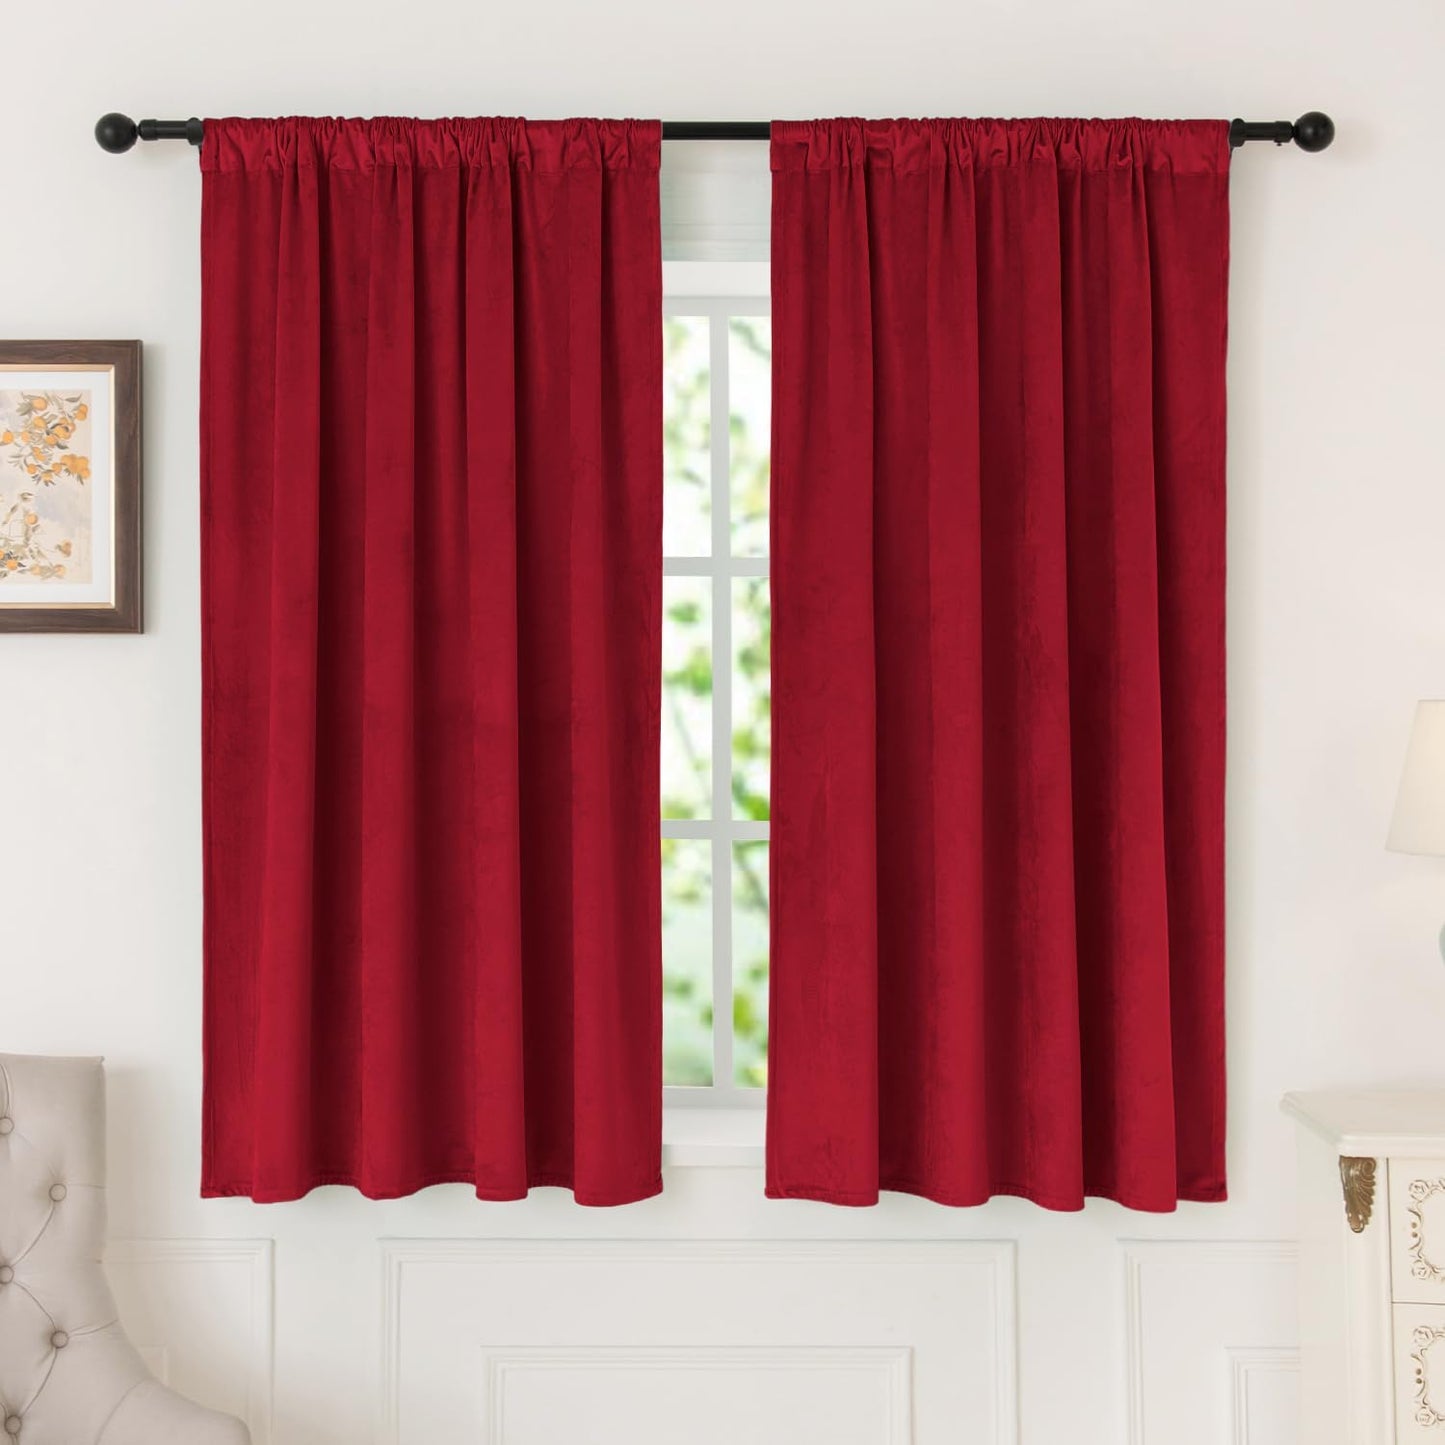 Nanbowang Green Velvet Curtains 63 Inches Long Dark Green Light Blocking Rod Pocket Window Curtain Panels Set of 2 Heat Insulated Curtains Thermal Curtain Panels for Bedroom  nanbowang Red 52"X72" 